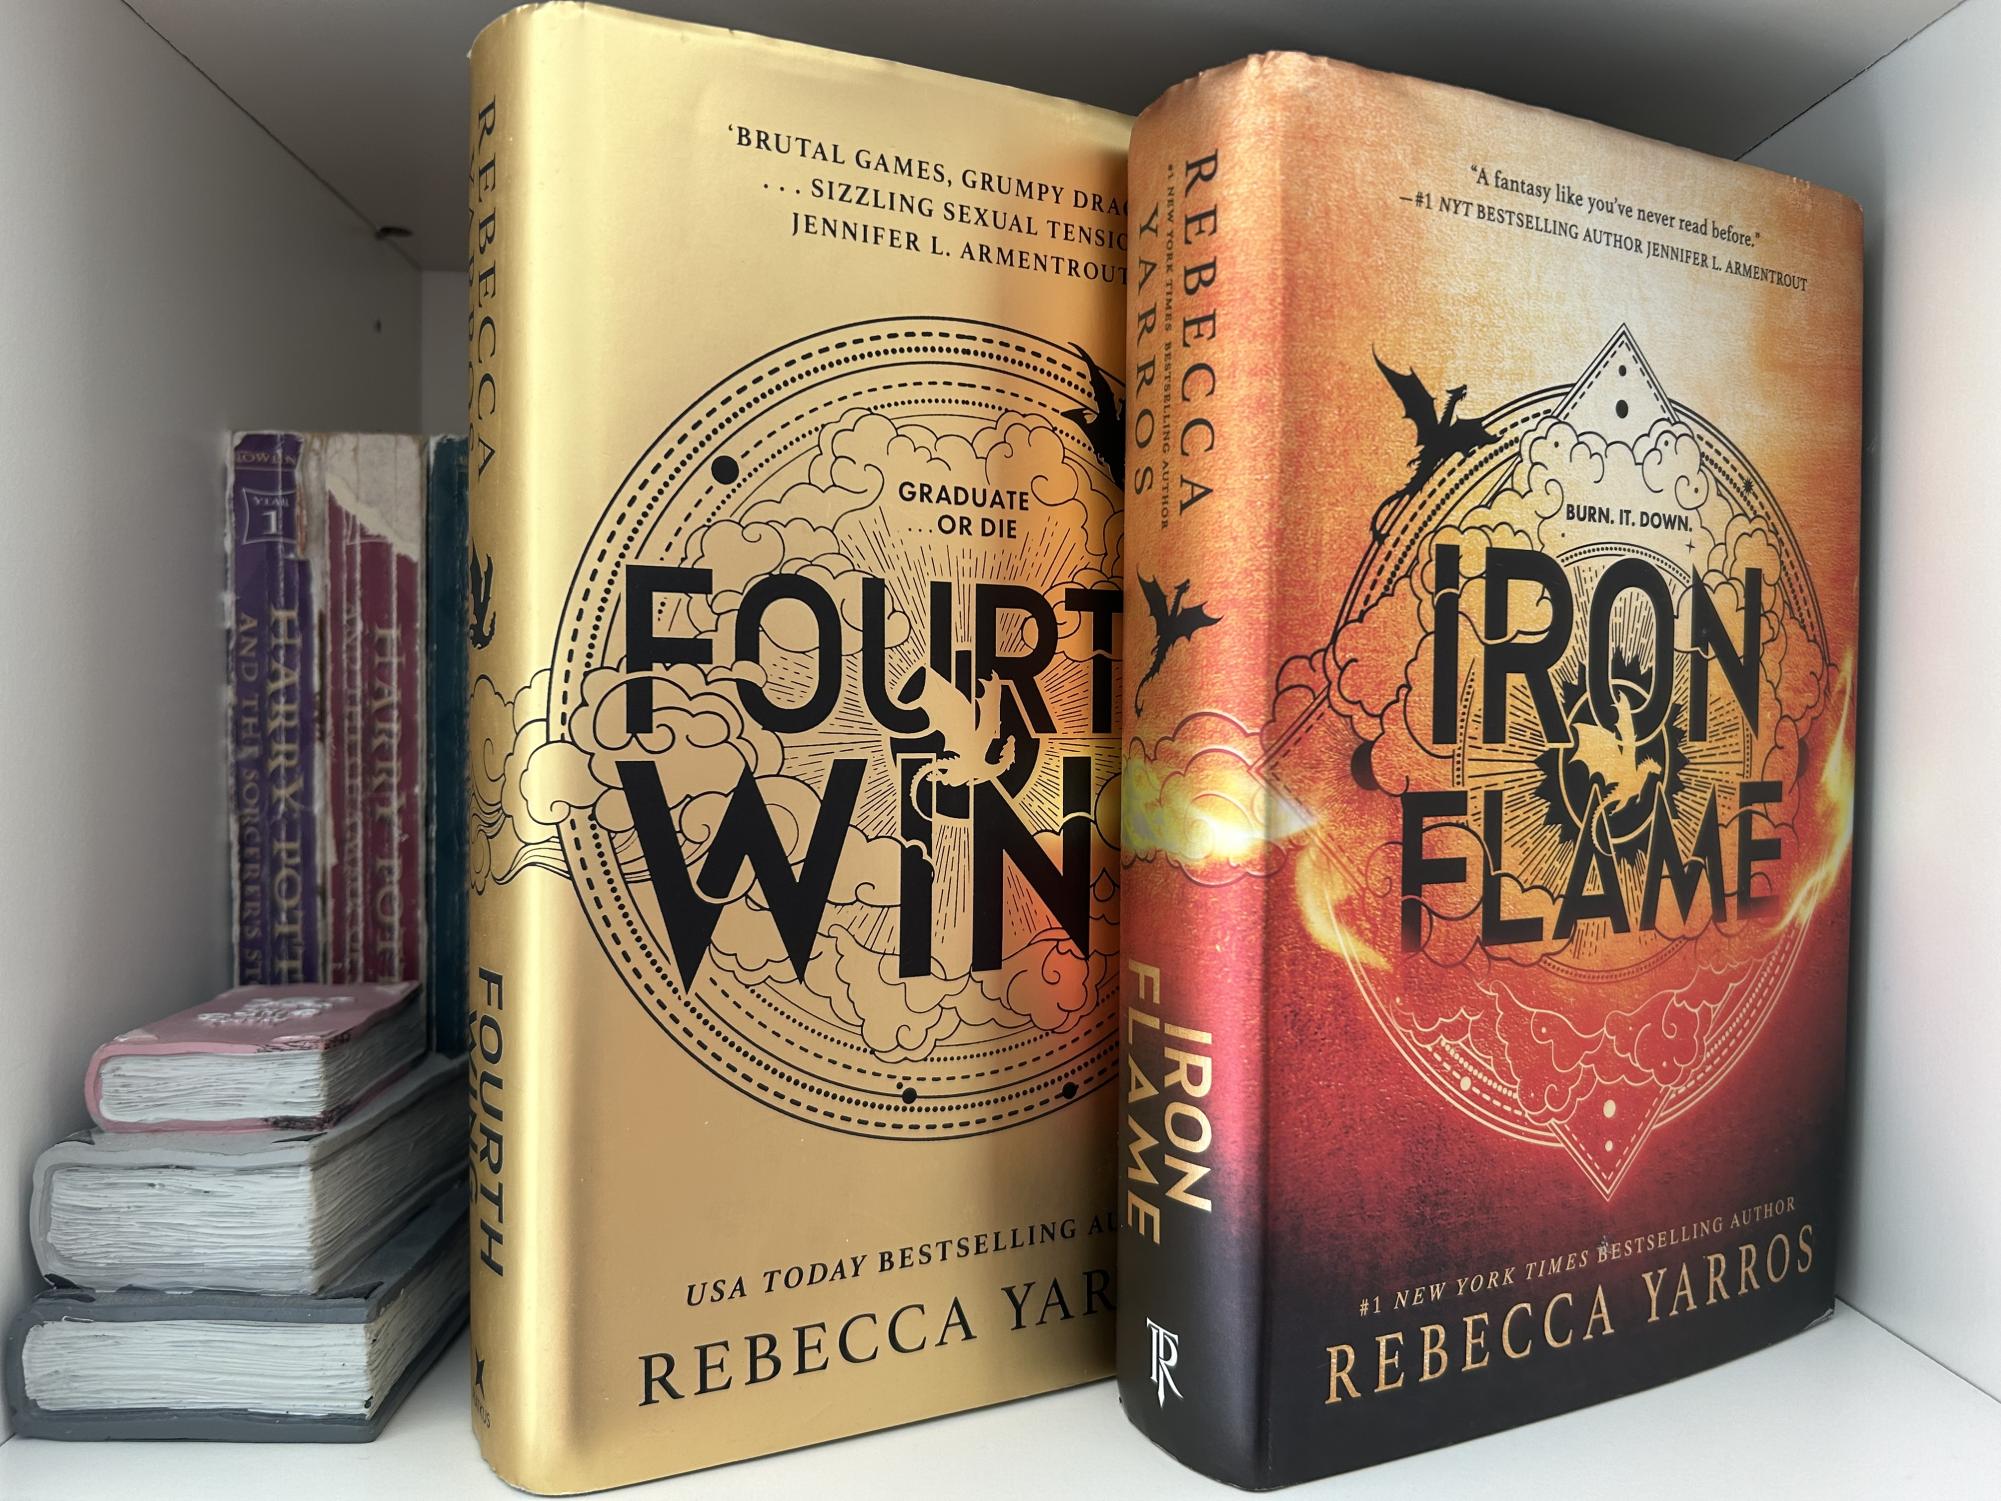 Iron Flame was published on November 7, 2023 and has an average rating of 4.37 out of 5 stars on Goodreads.

